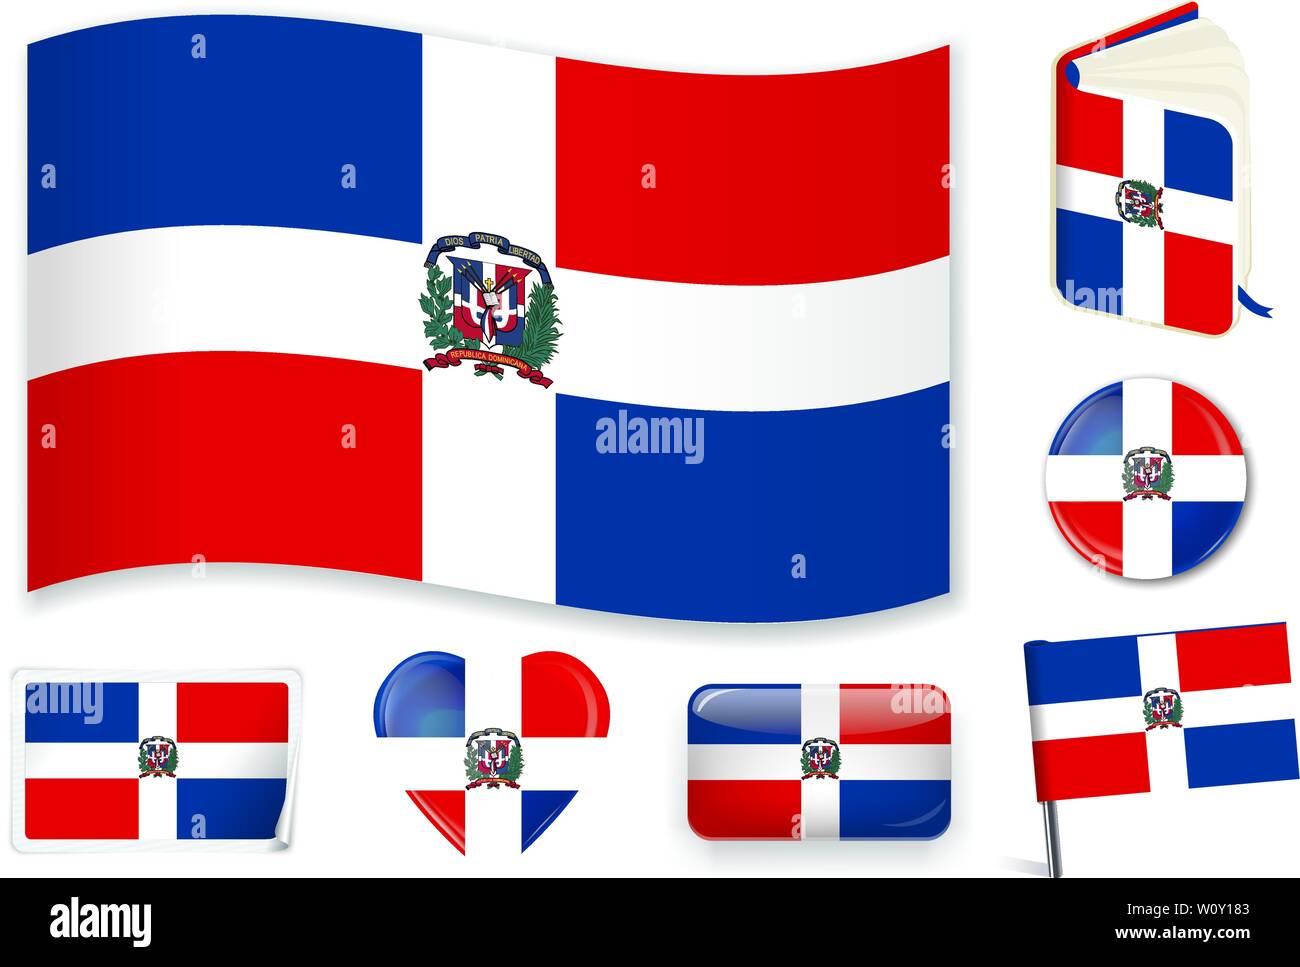 Dominican Republic National Flag Vector Illustration 3 Layers Shadows Flat Flag Lights And